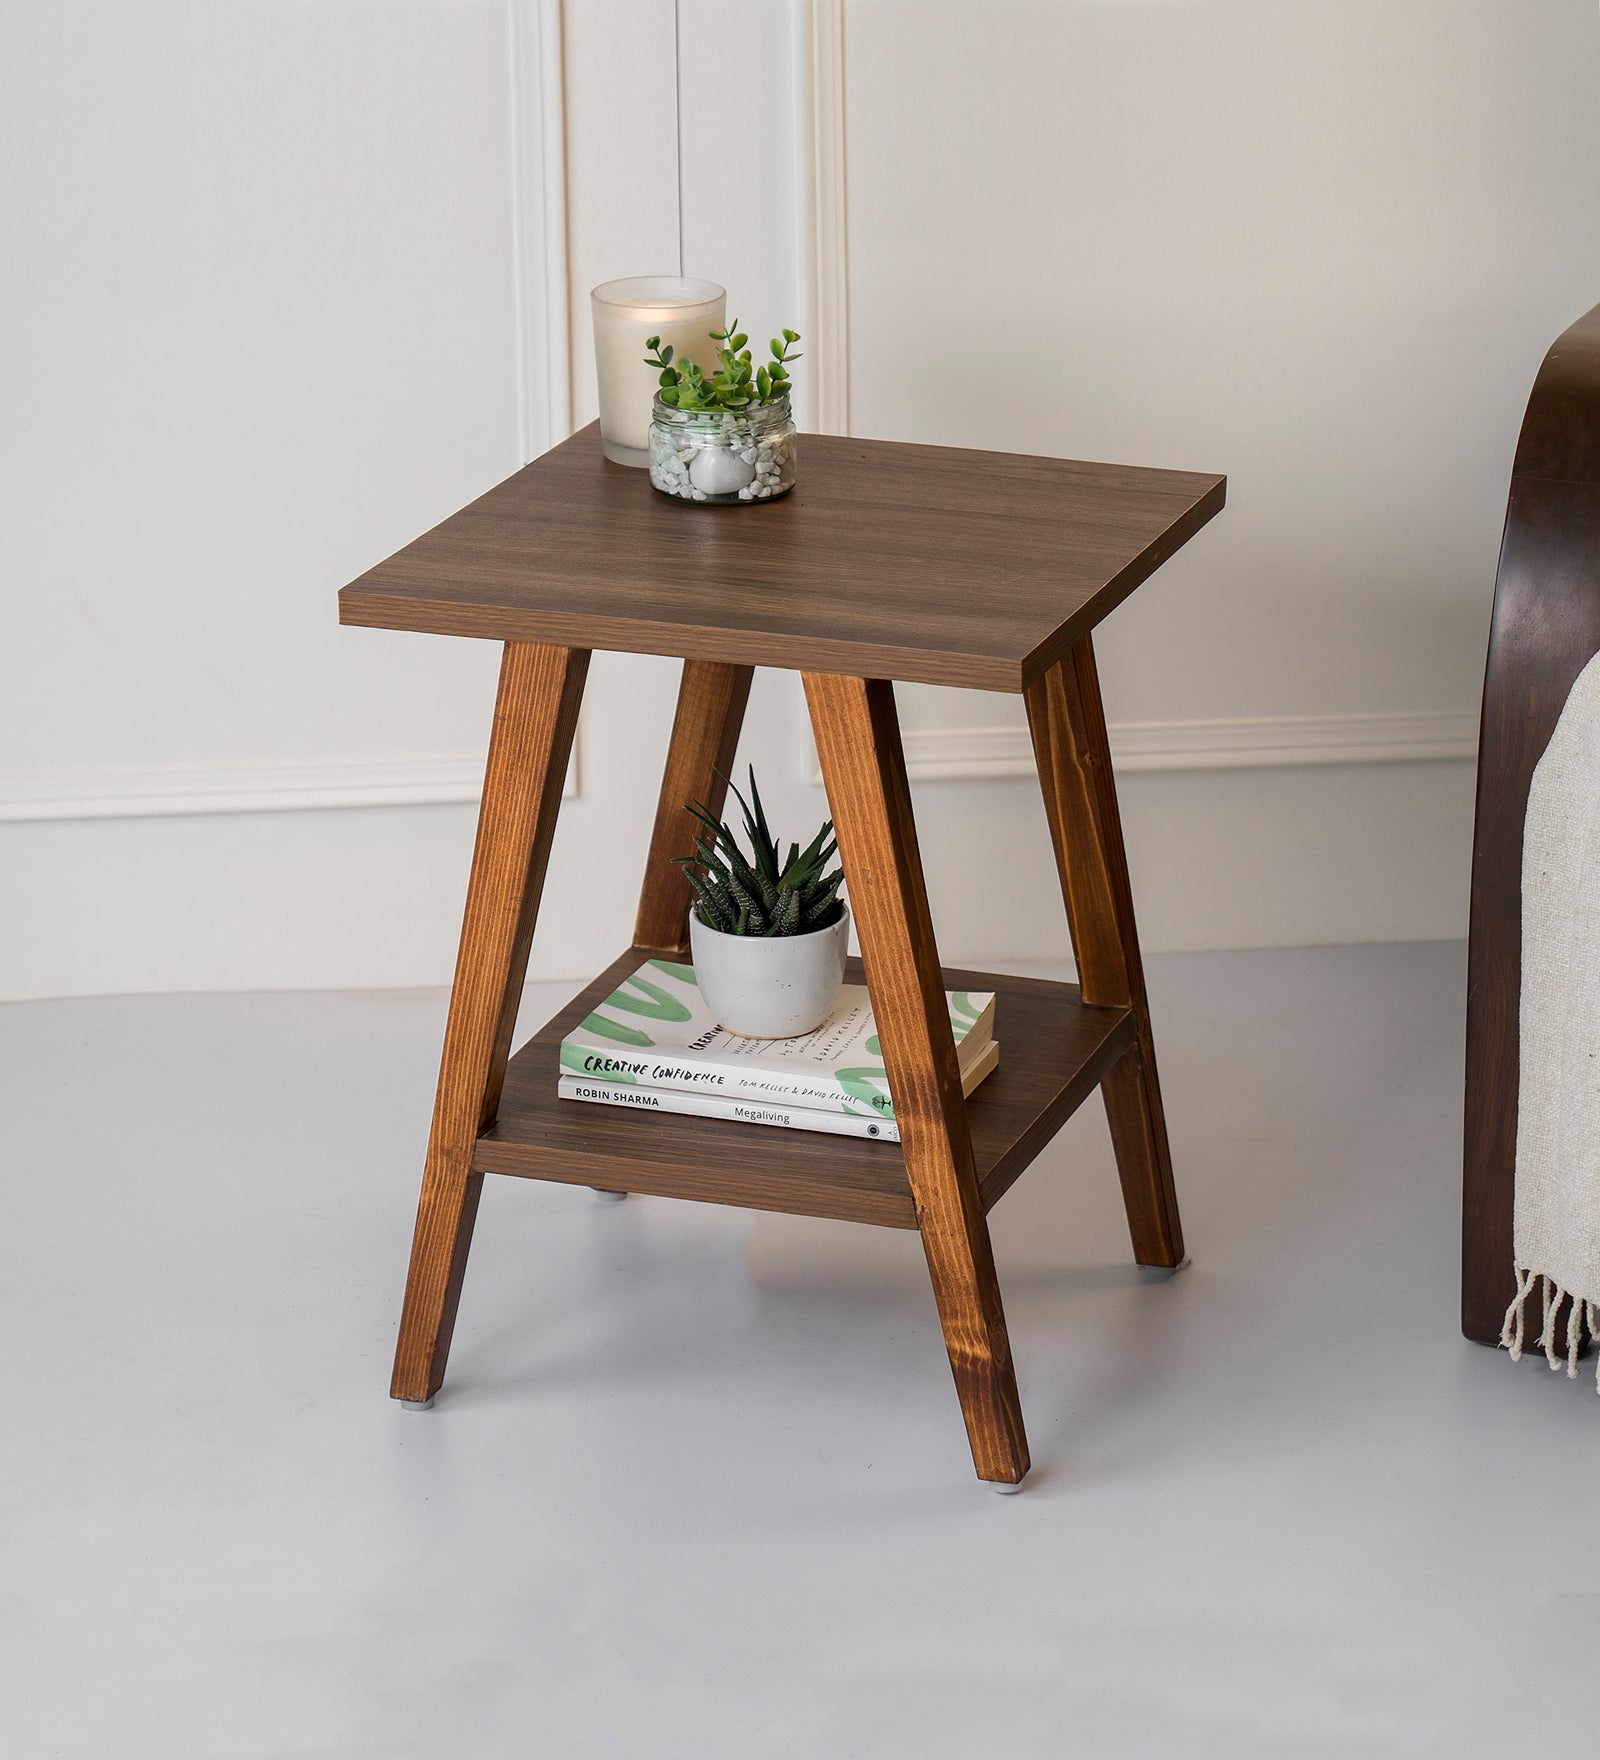 Trapezium Incline Table-  Side Table, Wooden End Table, Living Room Decor, Wooden Side Table, Living Room Table